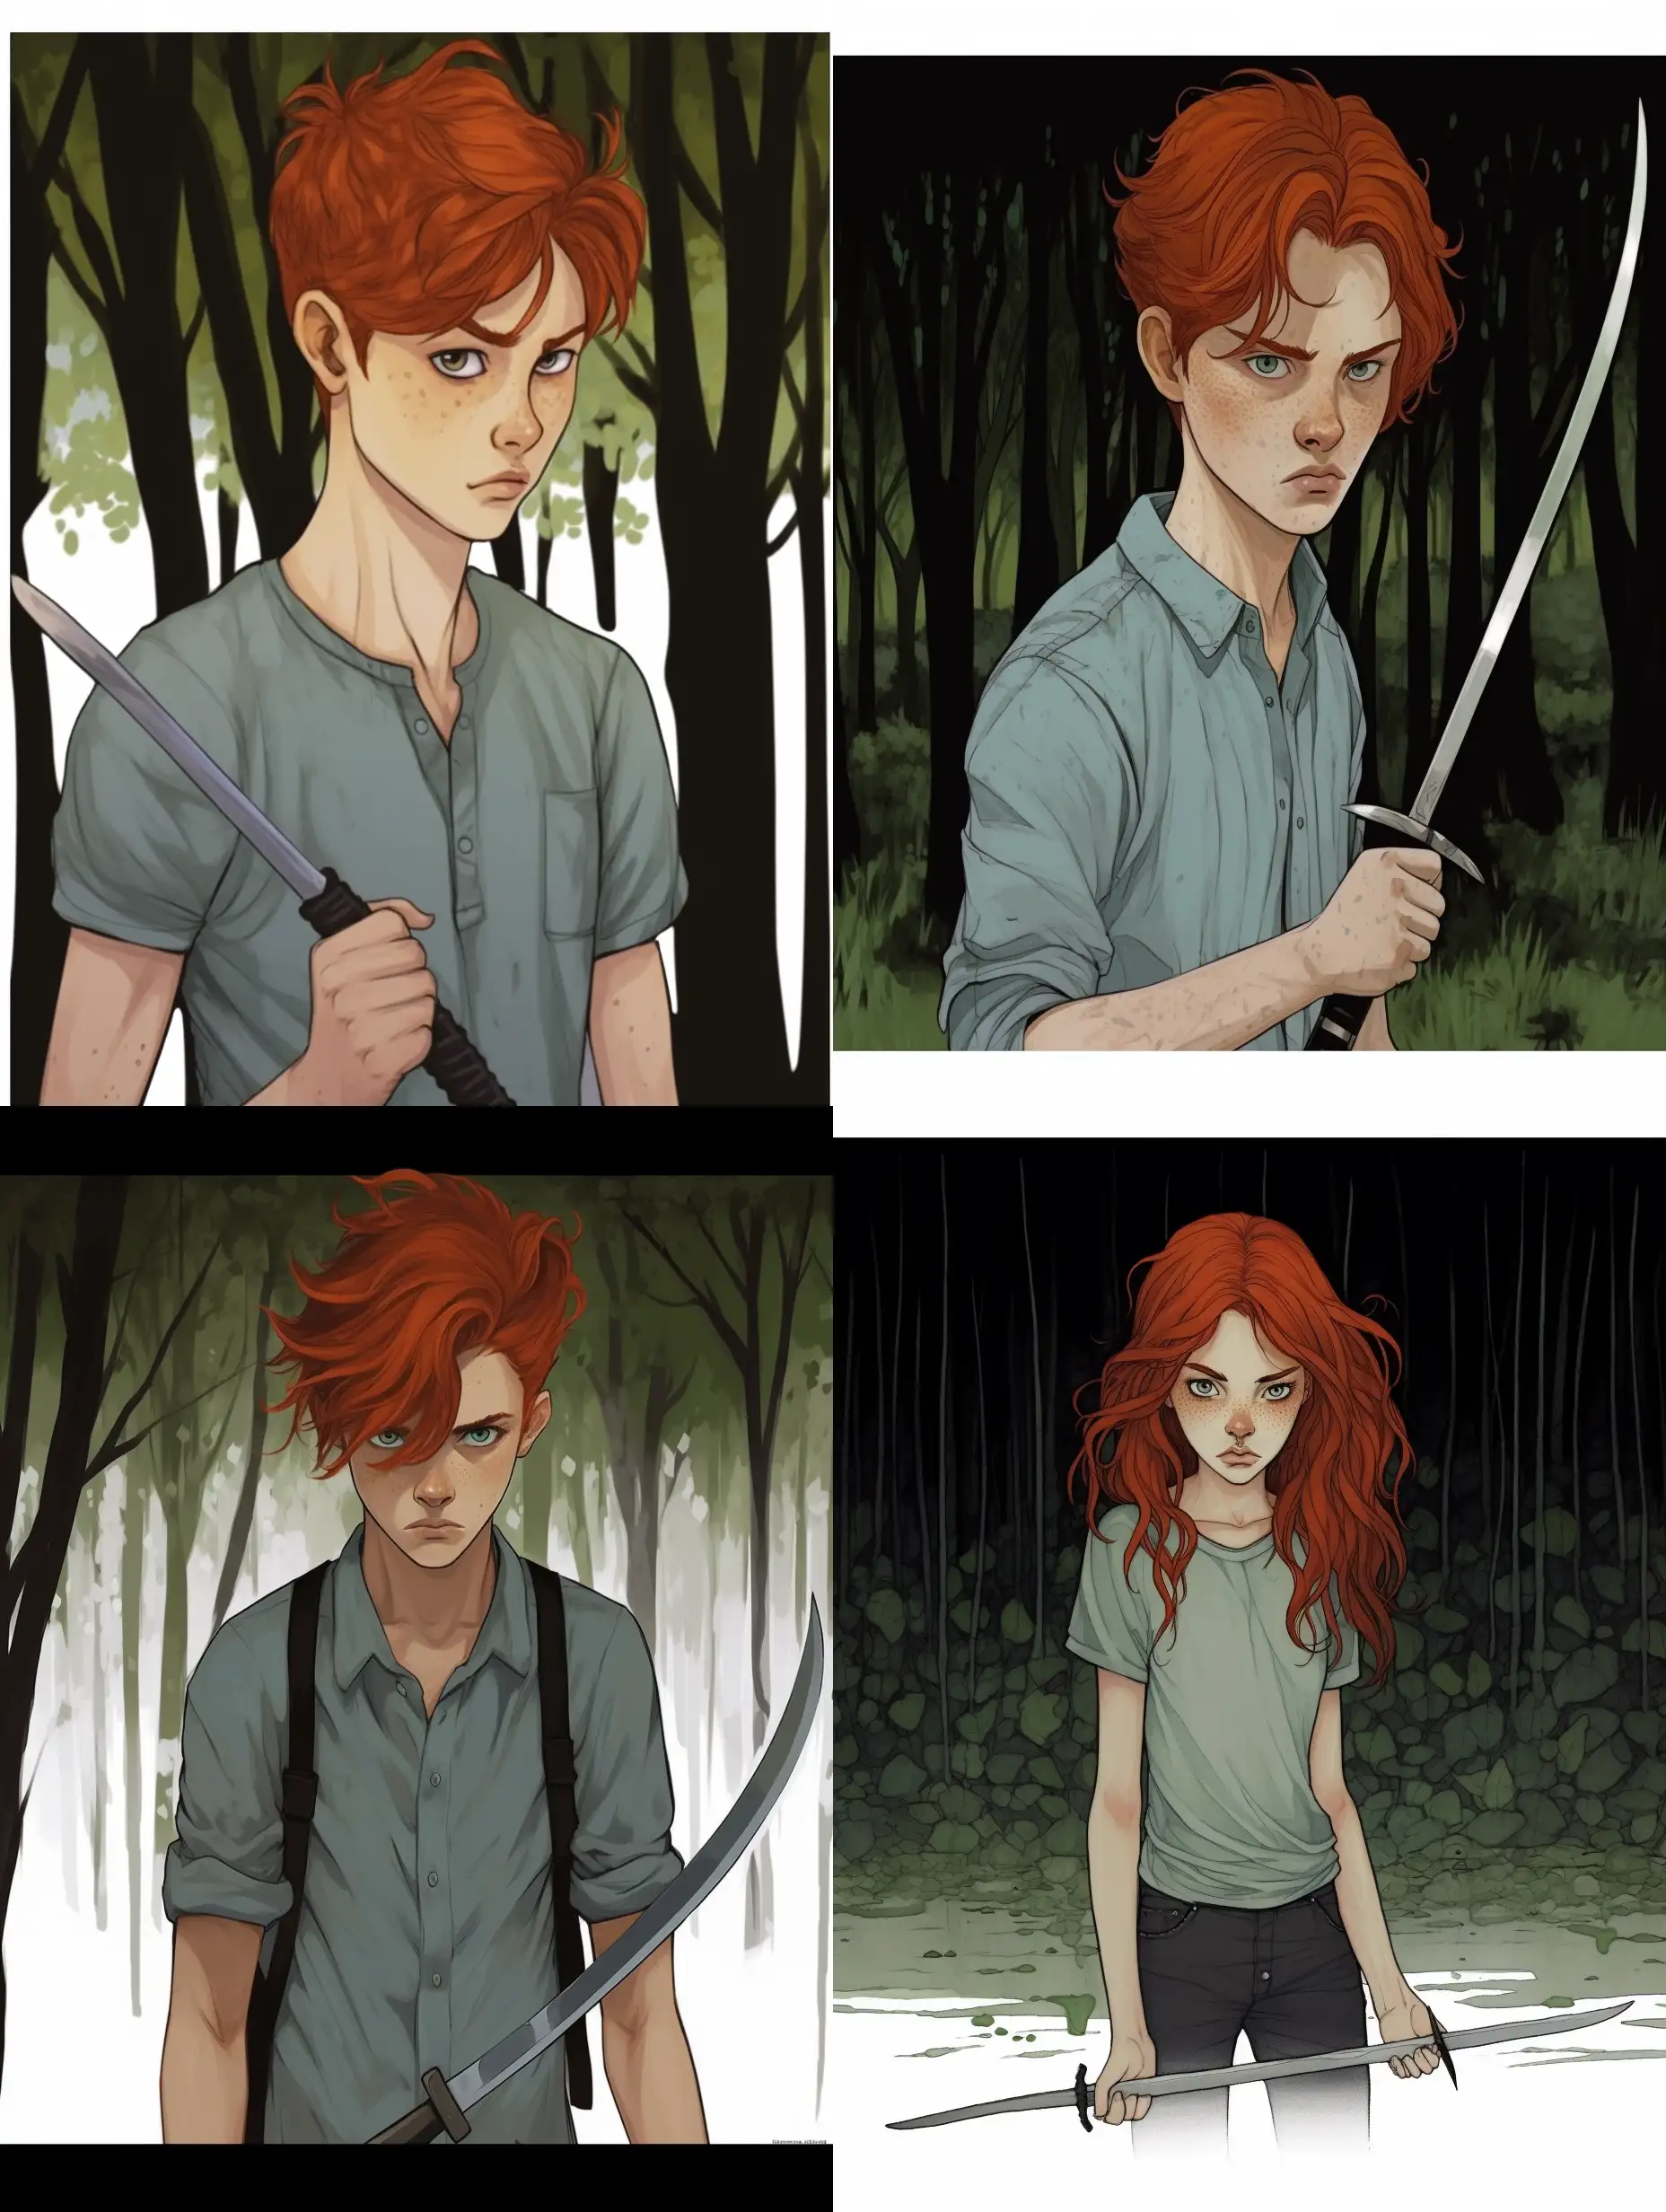 Boy. A teenager, 16 years old. Wiry, tall, fit. With curly red hair. Green eyes. Freckled face. Without a T-shirt. He's wearing battered shorts and a knife dangling from his belt. Barefoot. There is a sharpened stick in his right hand